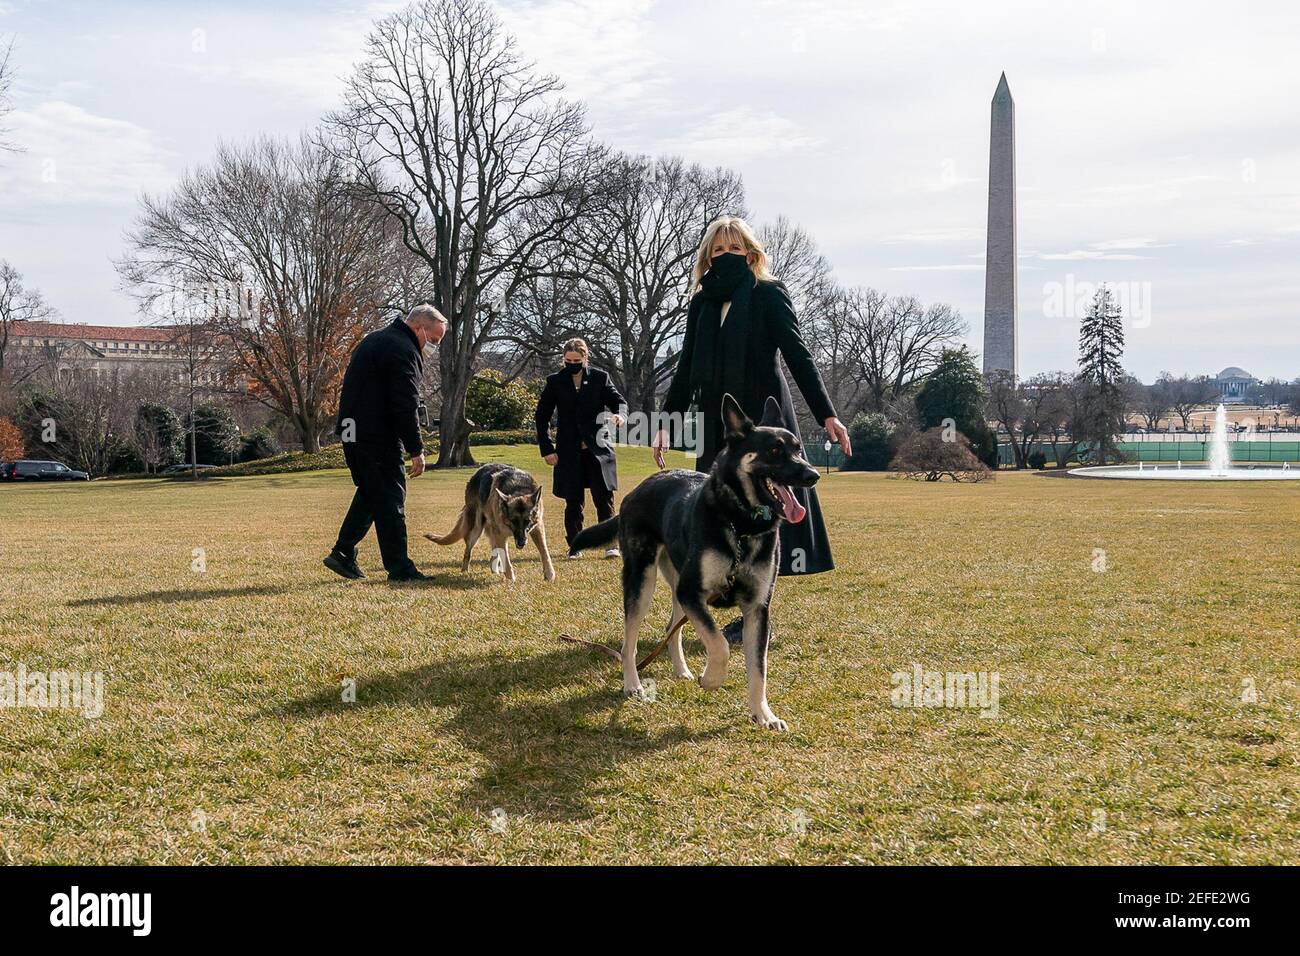 First Lady Dr. Jill Biden, joined by White House Grounds Superintendent Dale Haney and her granddaughter Maisy Biden, play with the Bidens' dogs Major and Champ on the South Lawn of the White House on Sunday, Jan. 24, 2021. Major and Champ are the first pets at the White House since the Obama Administration. Stock Photo